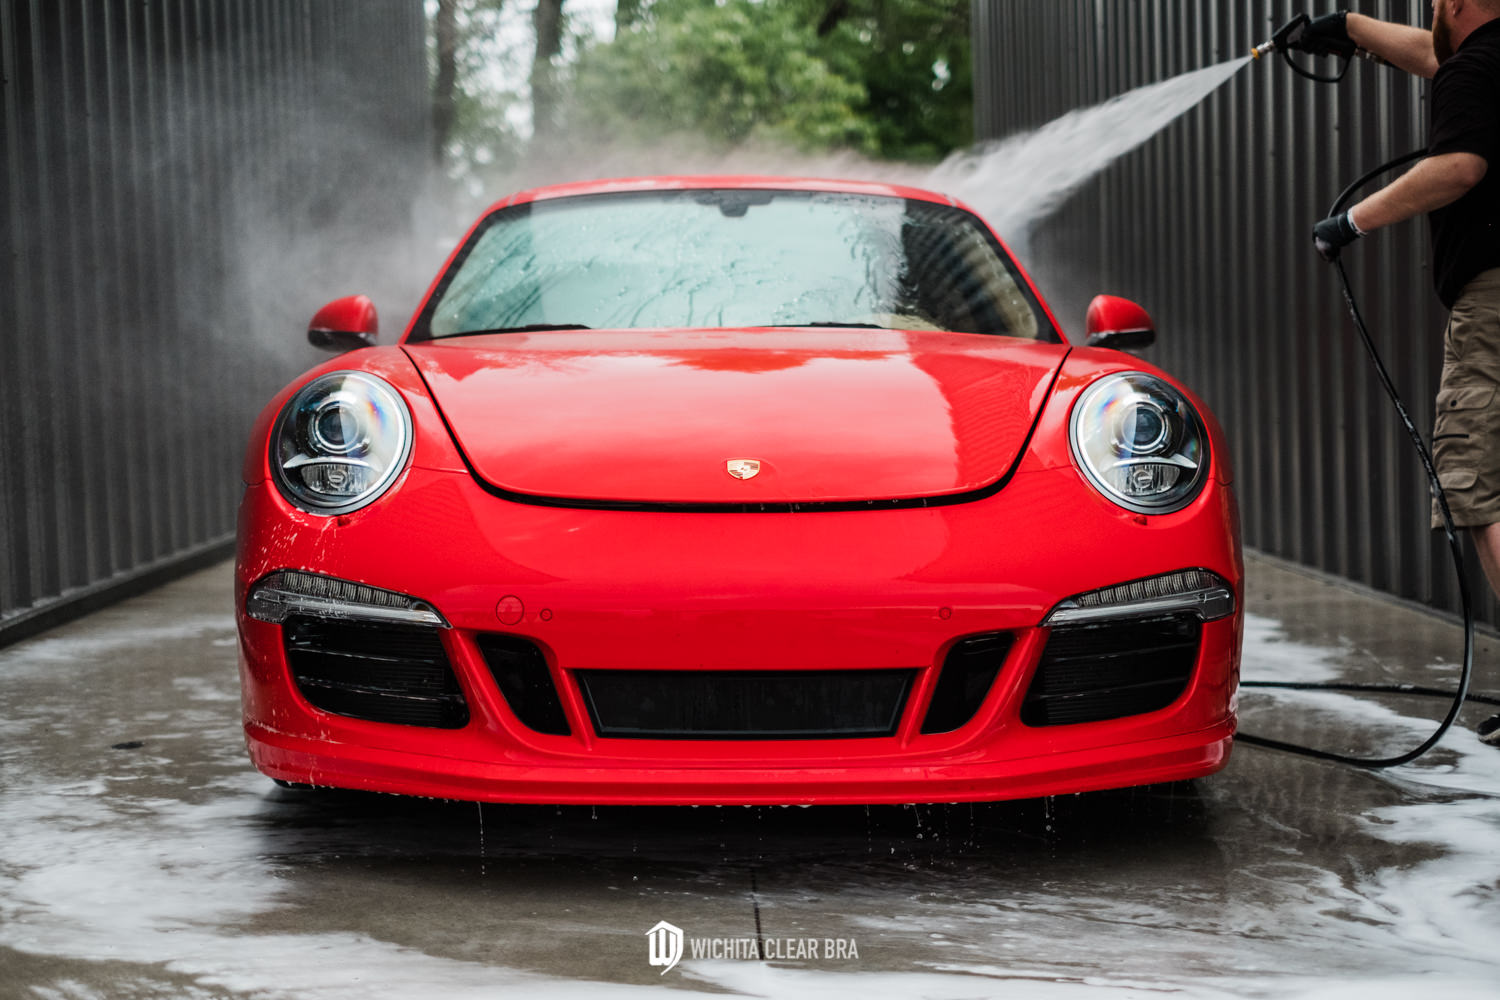 Wichita Clear Bra - Porsche 911 - Forgeline Wheels CF201 - Carbon + Forged Series - XPEL PPF - Paint Protection - Modified Porsche 911 -  Ceramic Pro Coating-114.jpg